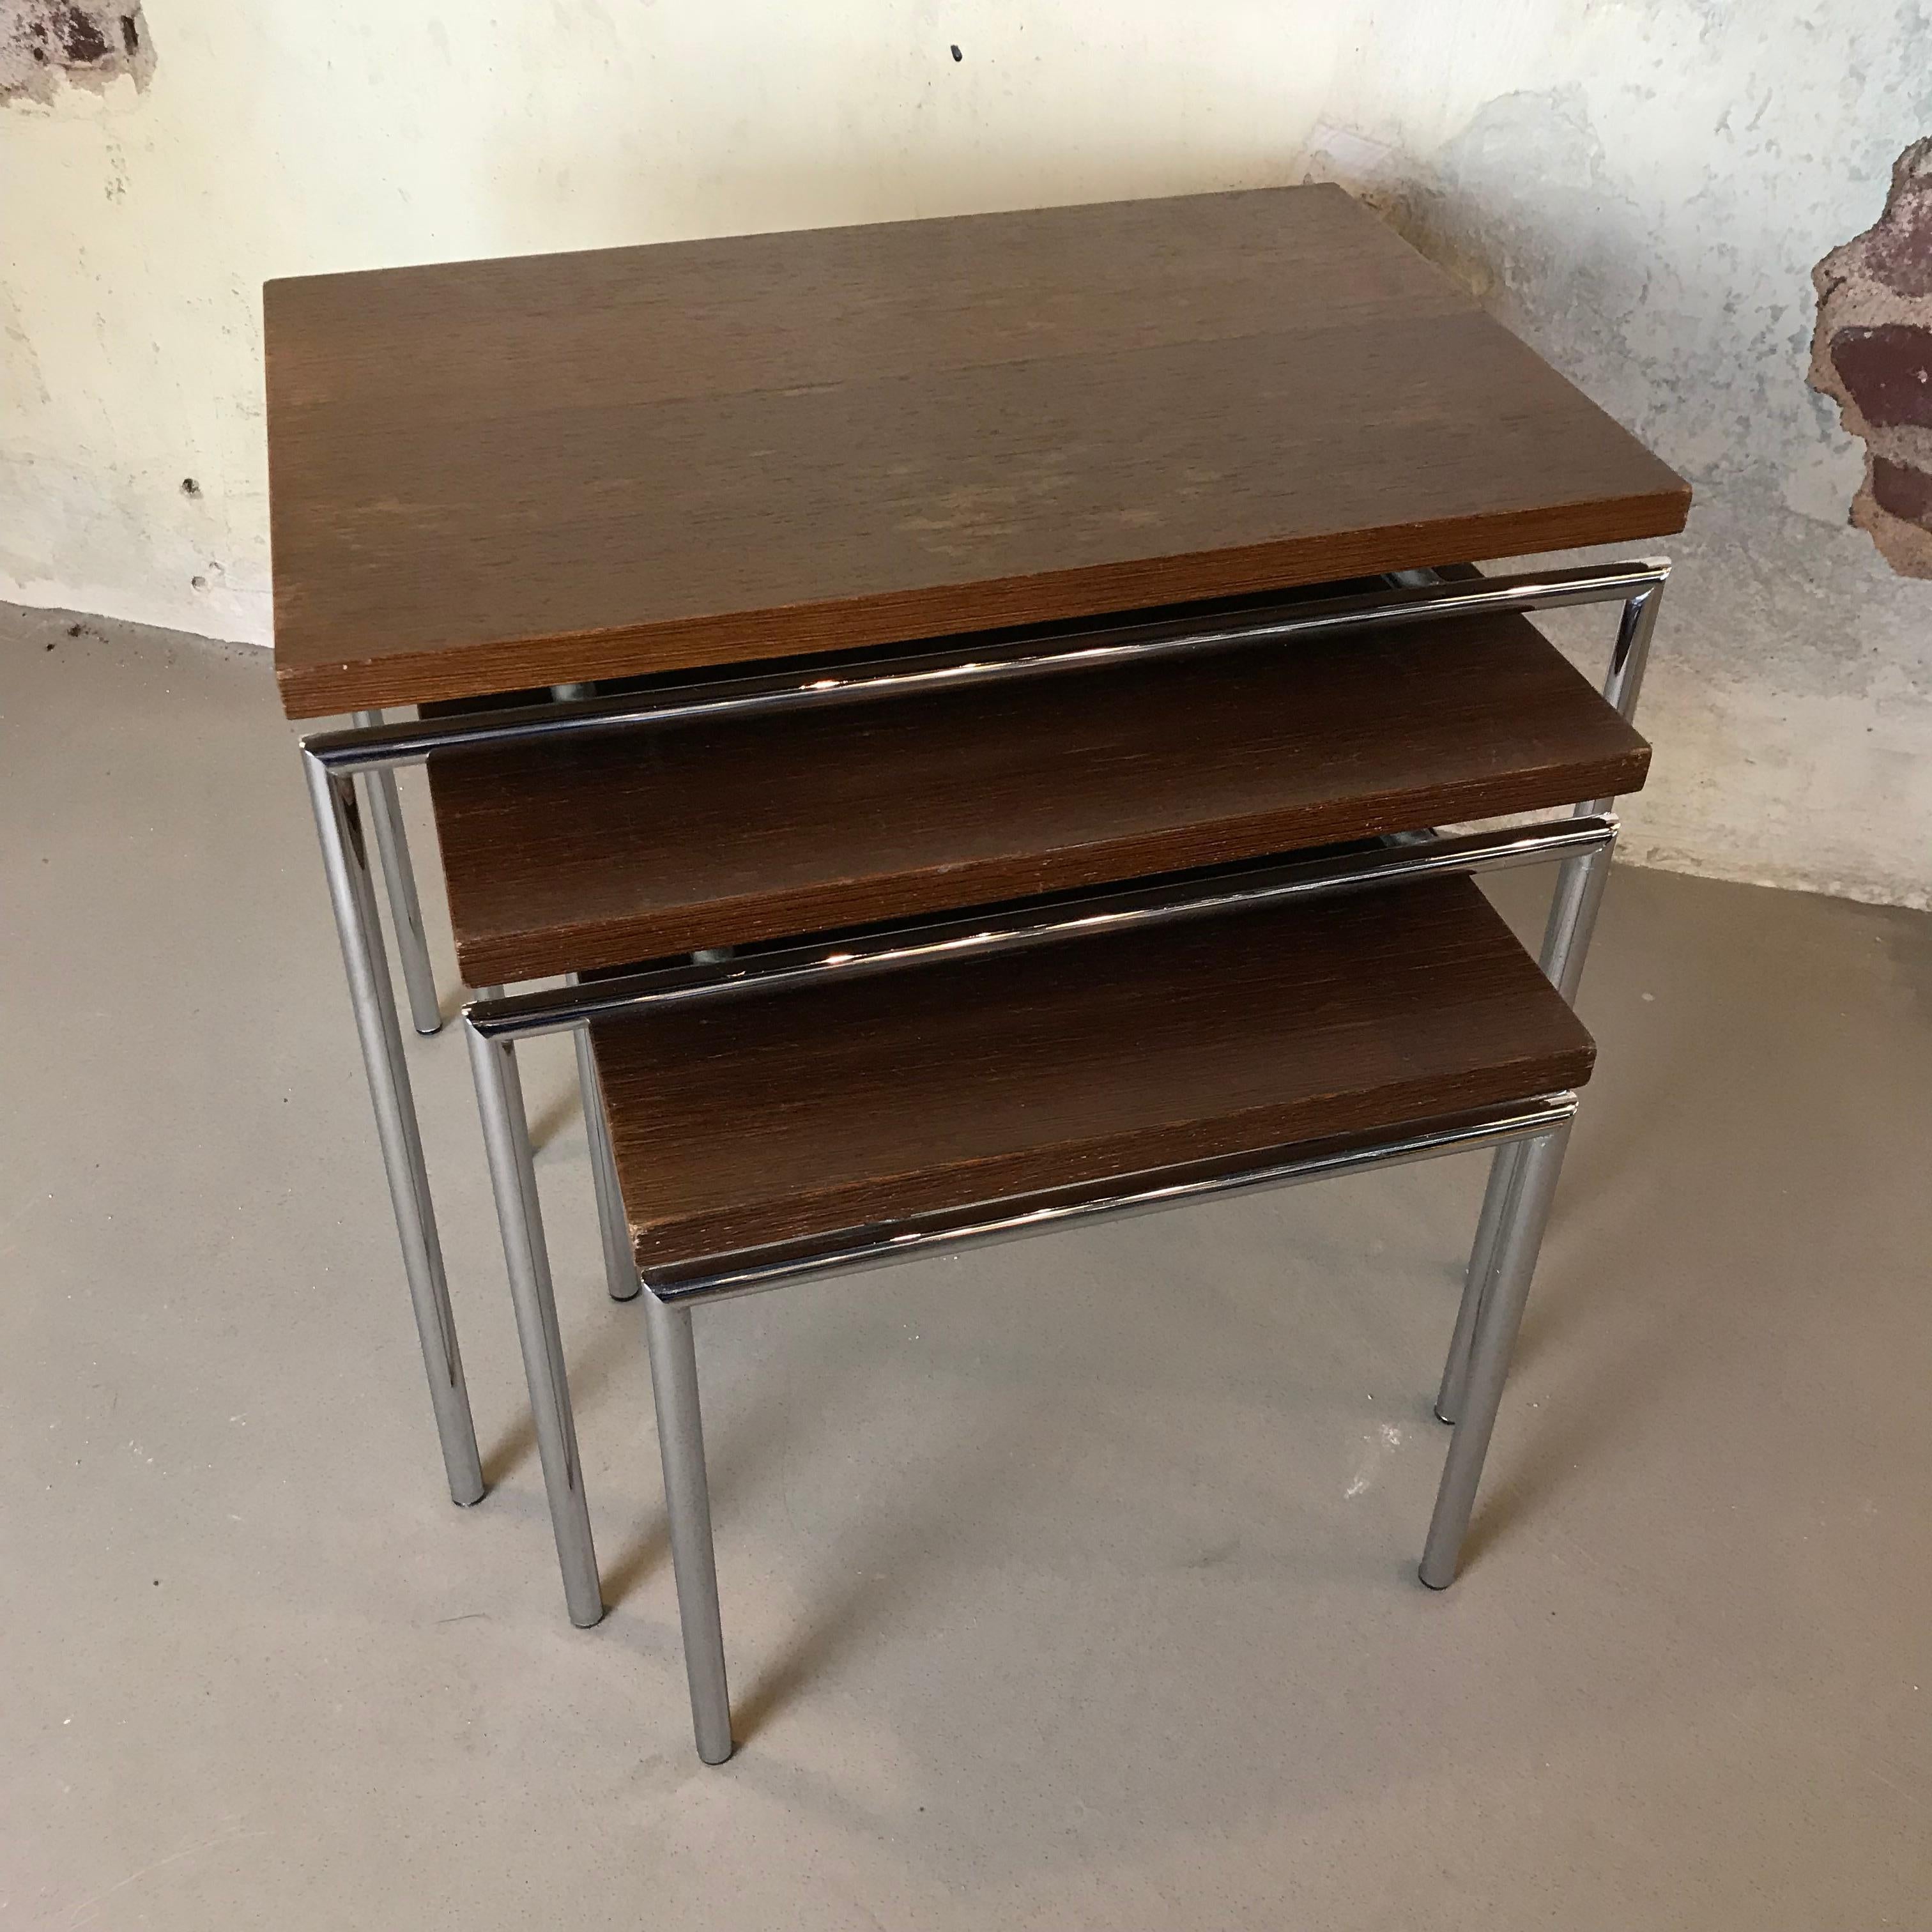 Dutch Midcentury Teak Nesting Tables by Cees Braakman for Pastoe, 1950s For Sale